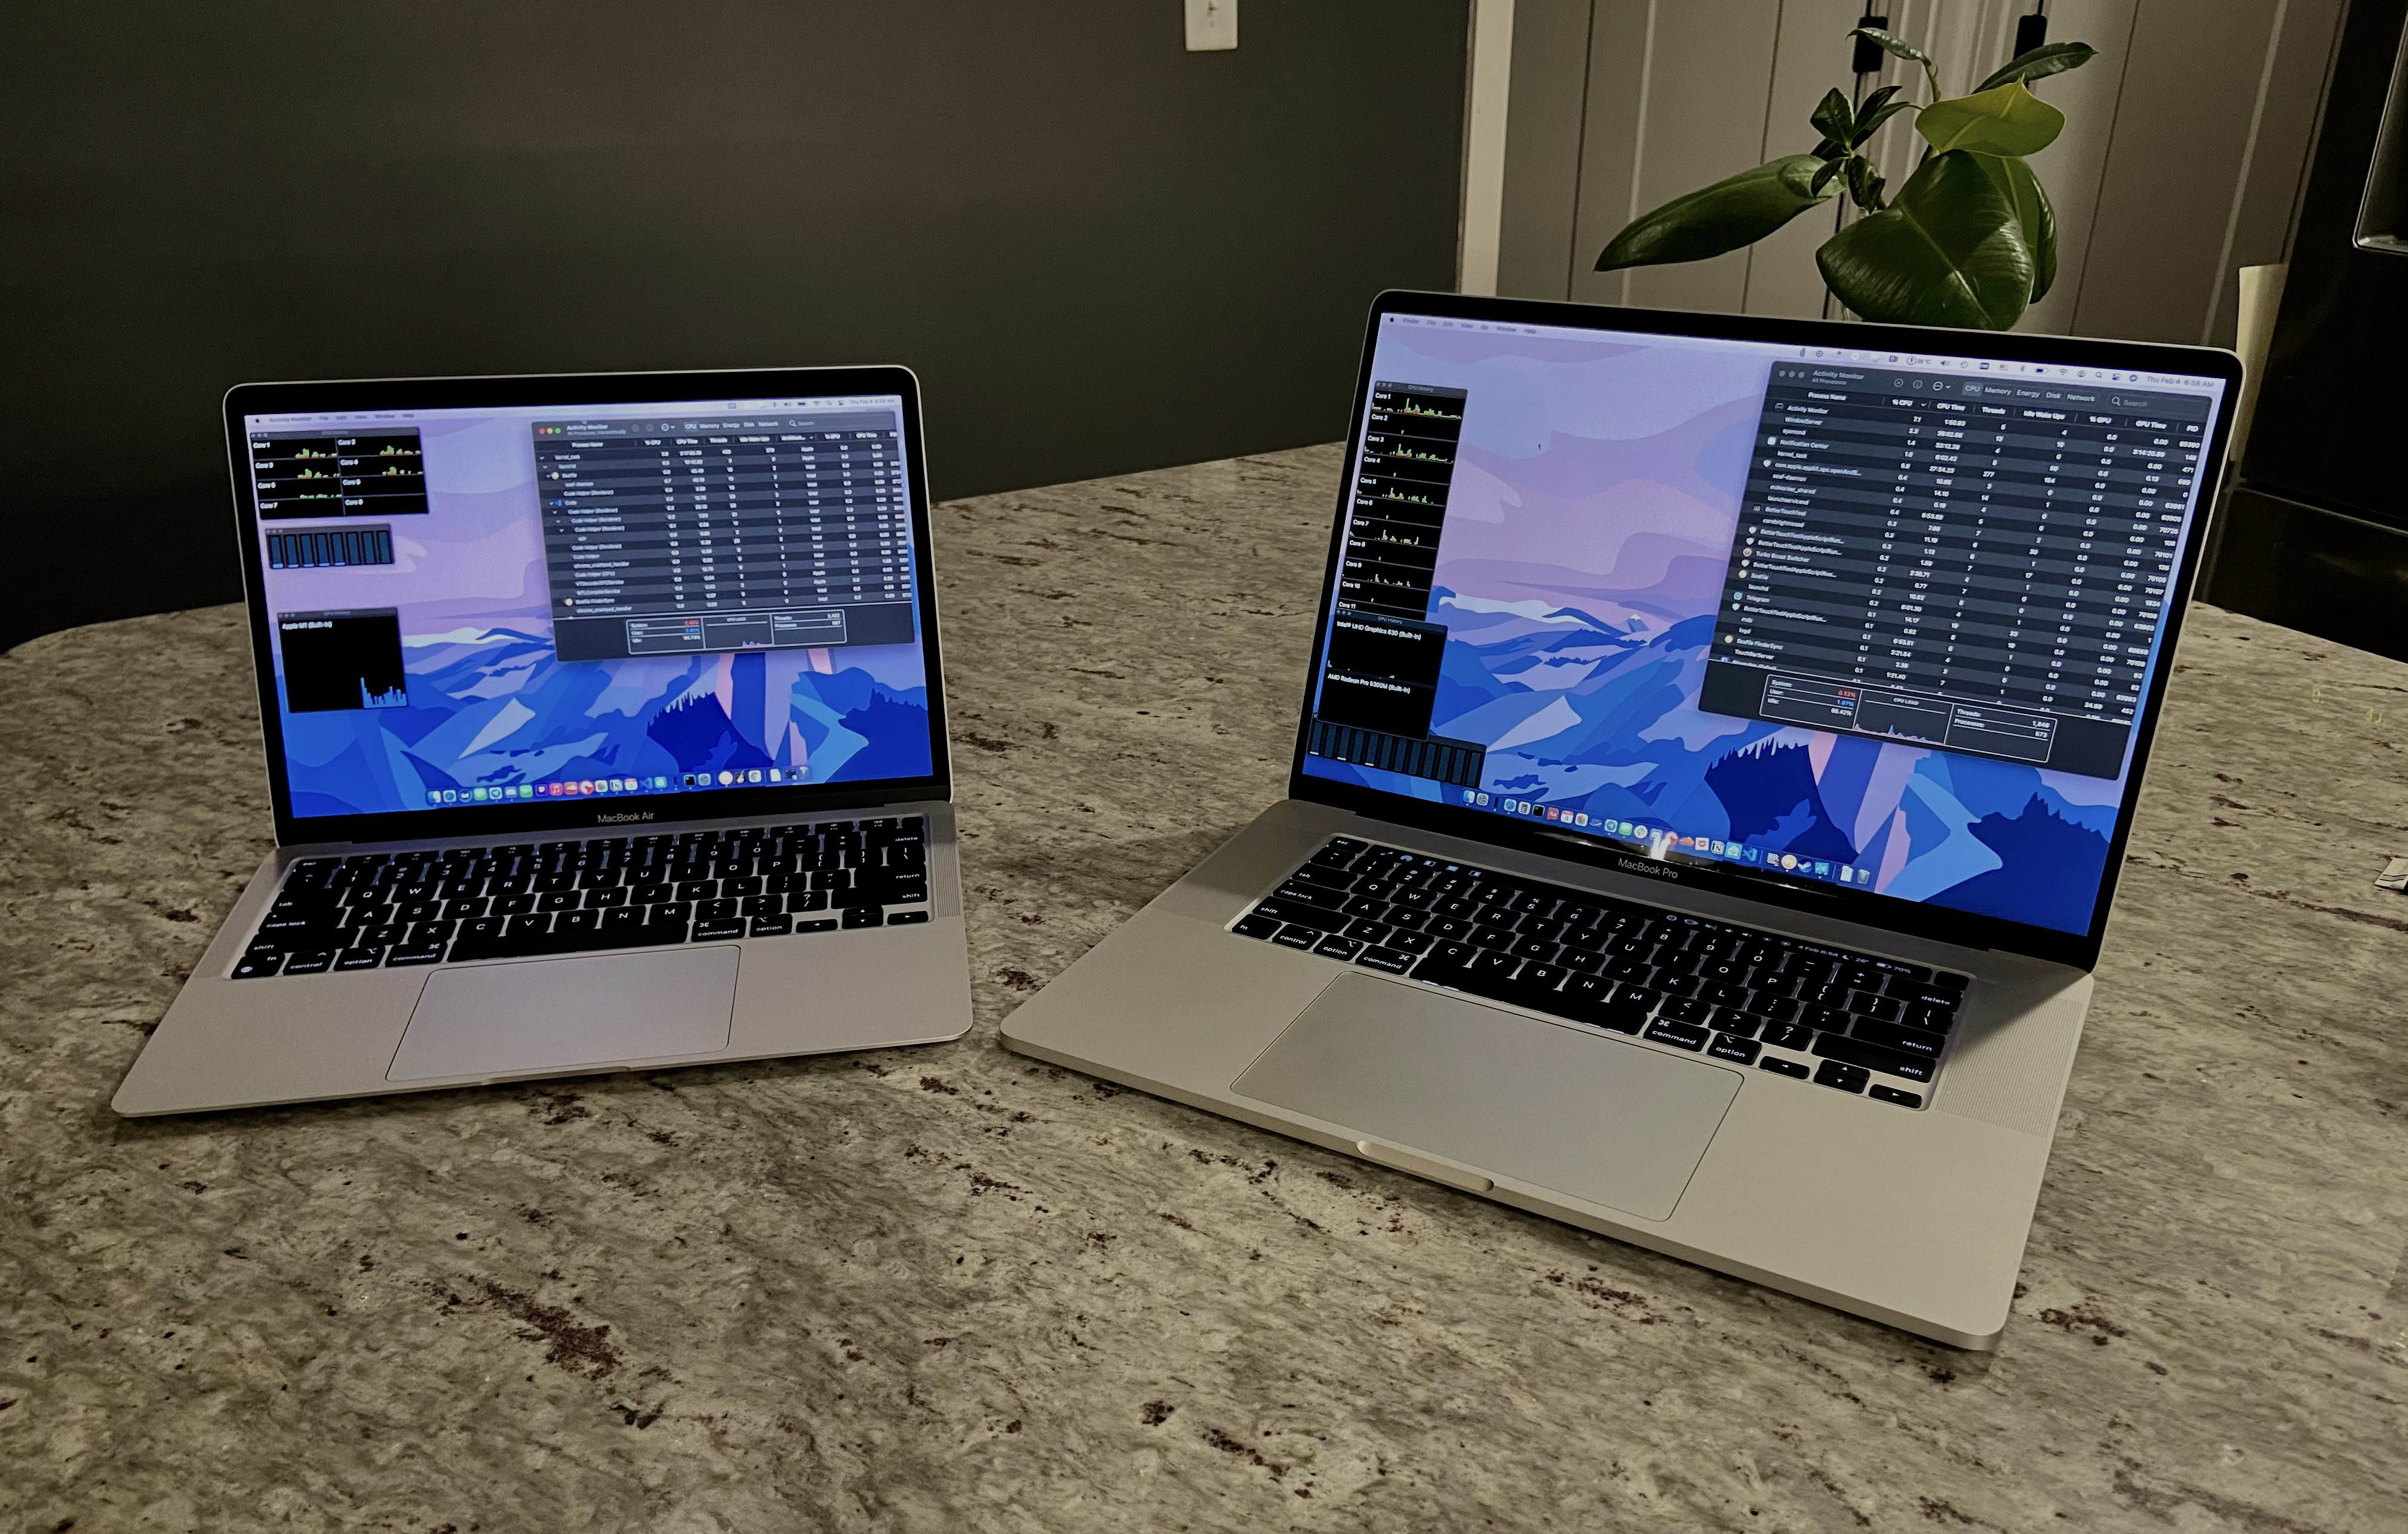 My previous two macbooks